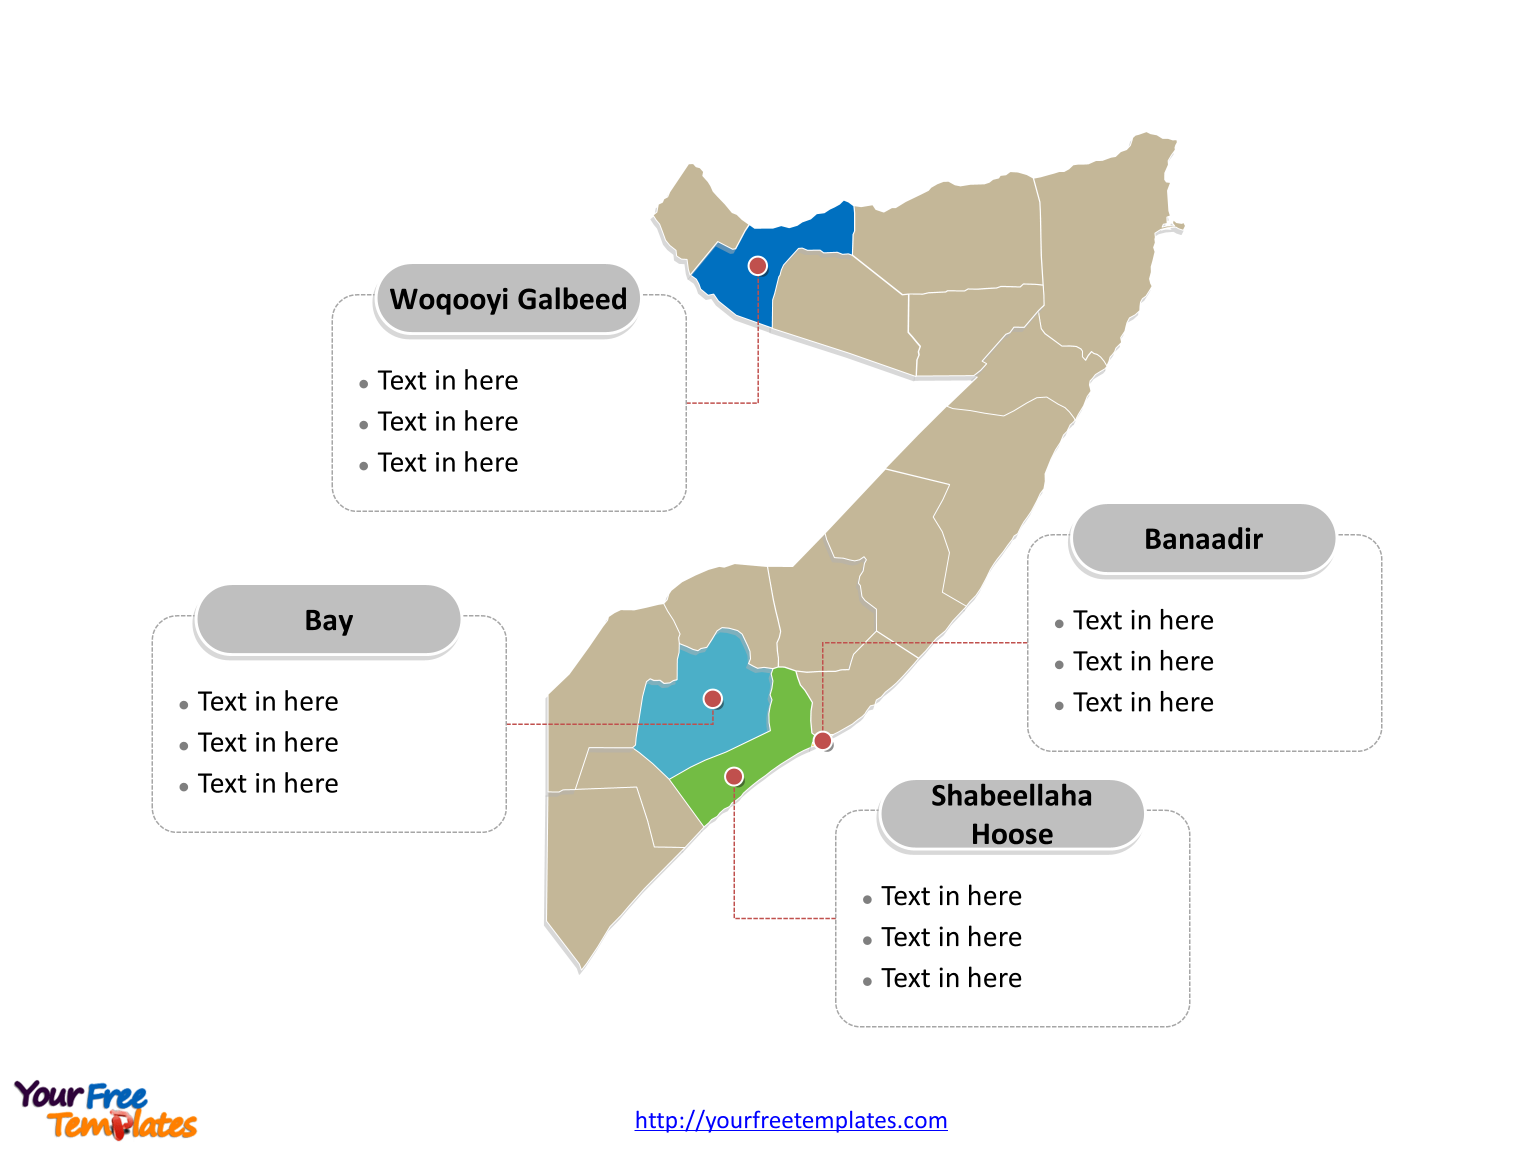 Somalia map labeled with cities